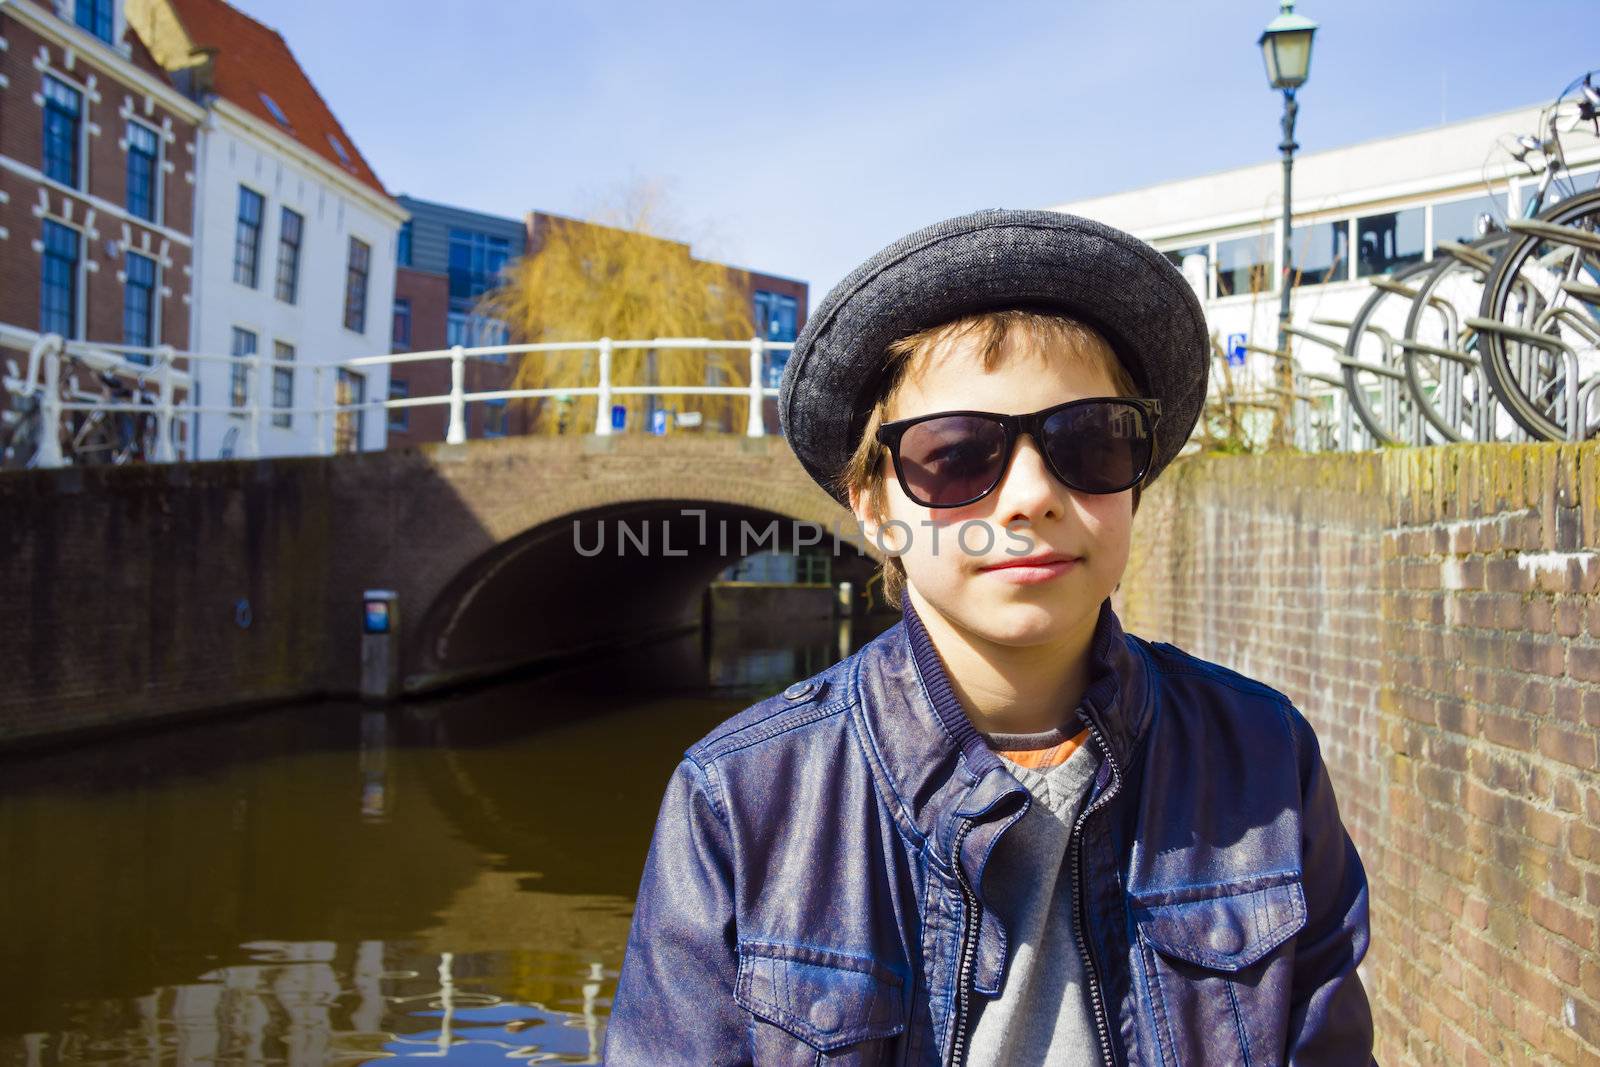 Handsome boy in sunglasses against canal background